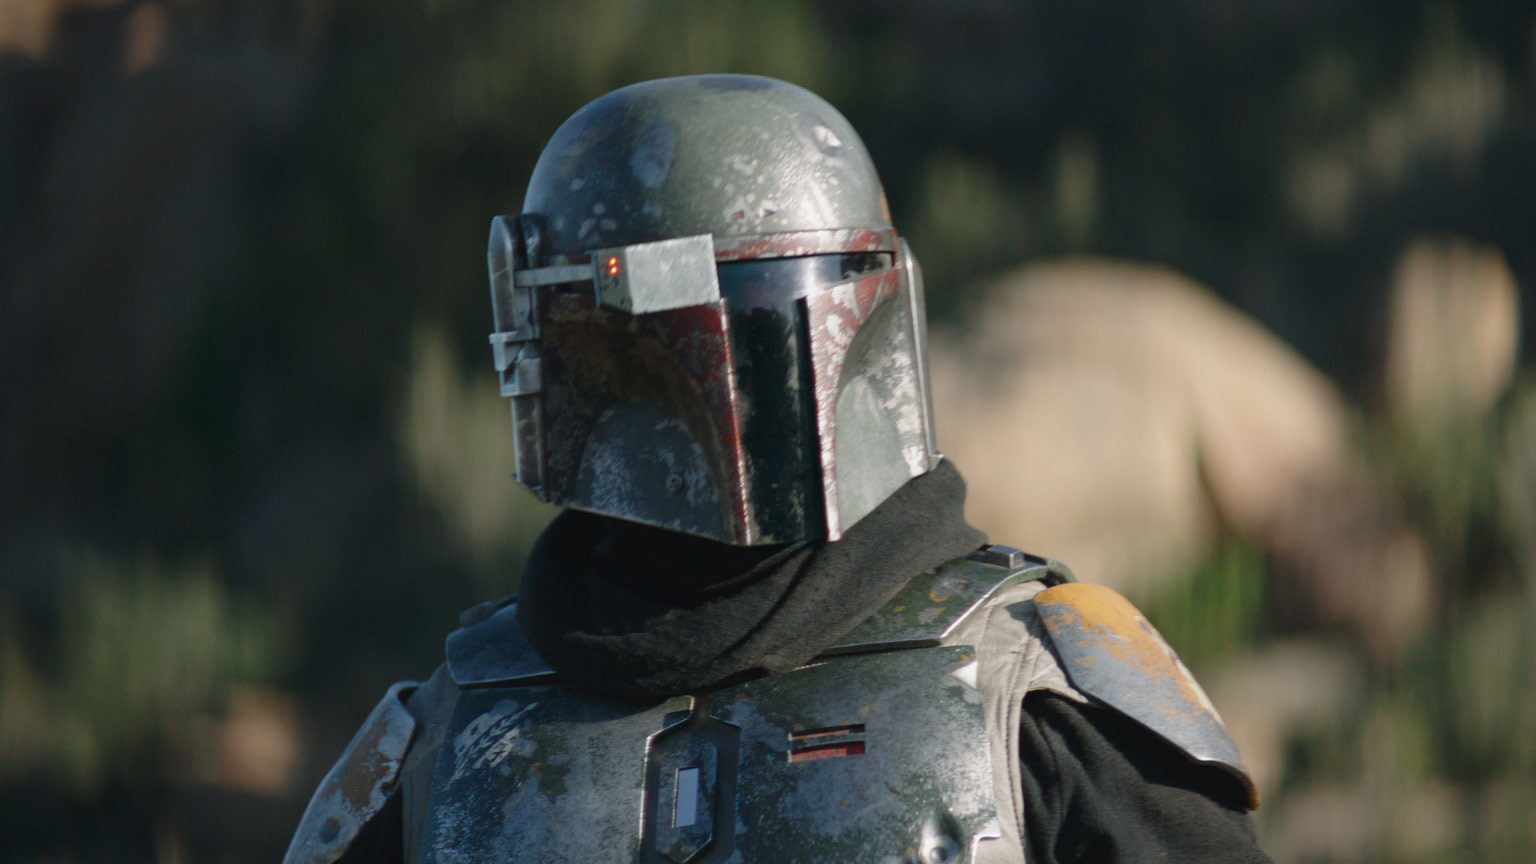 Bounty Hunting Highlights: 5 of Our Favorite Moments from The Mandalorian - “Chapter 14: The Tragedy”